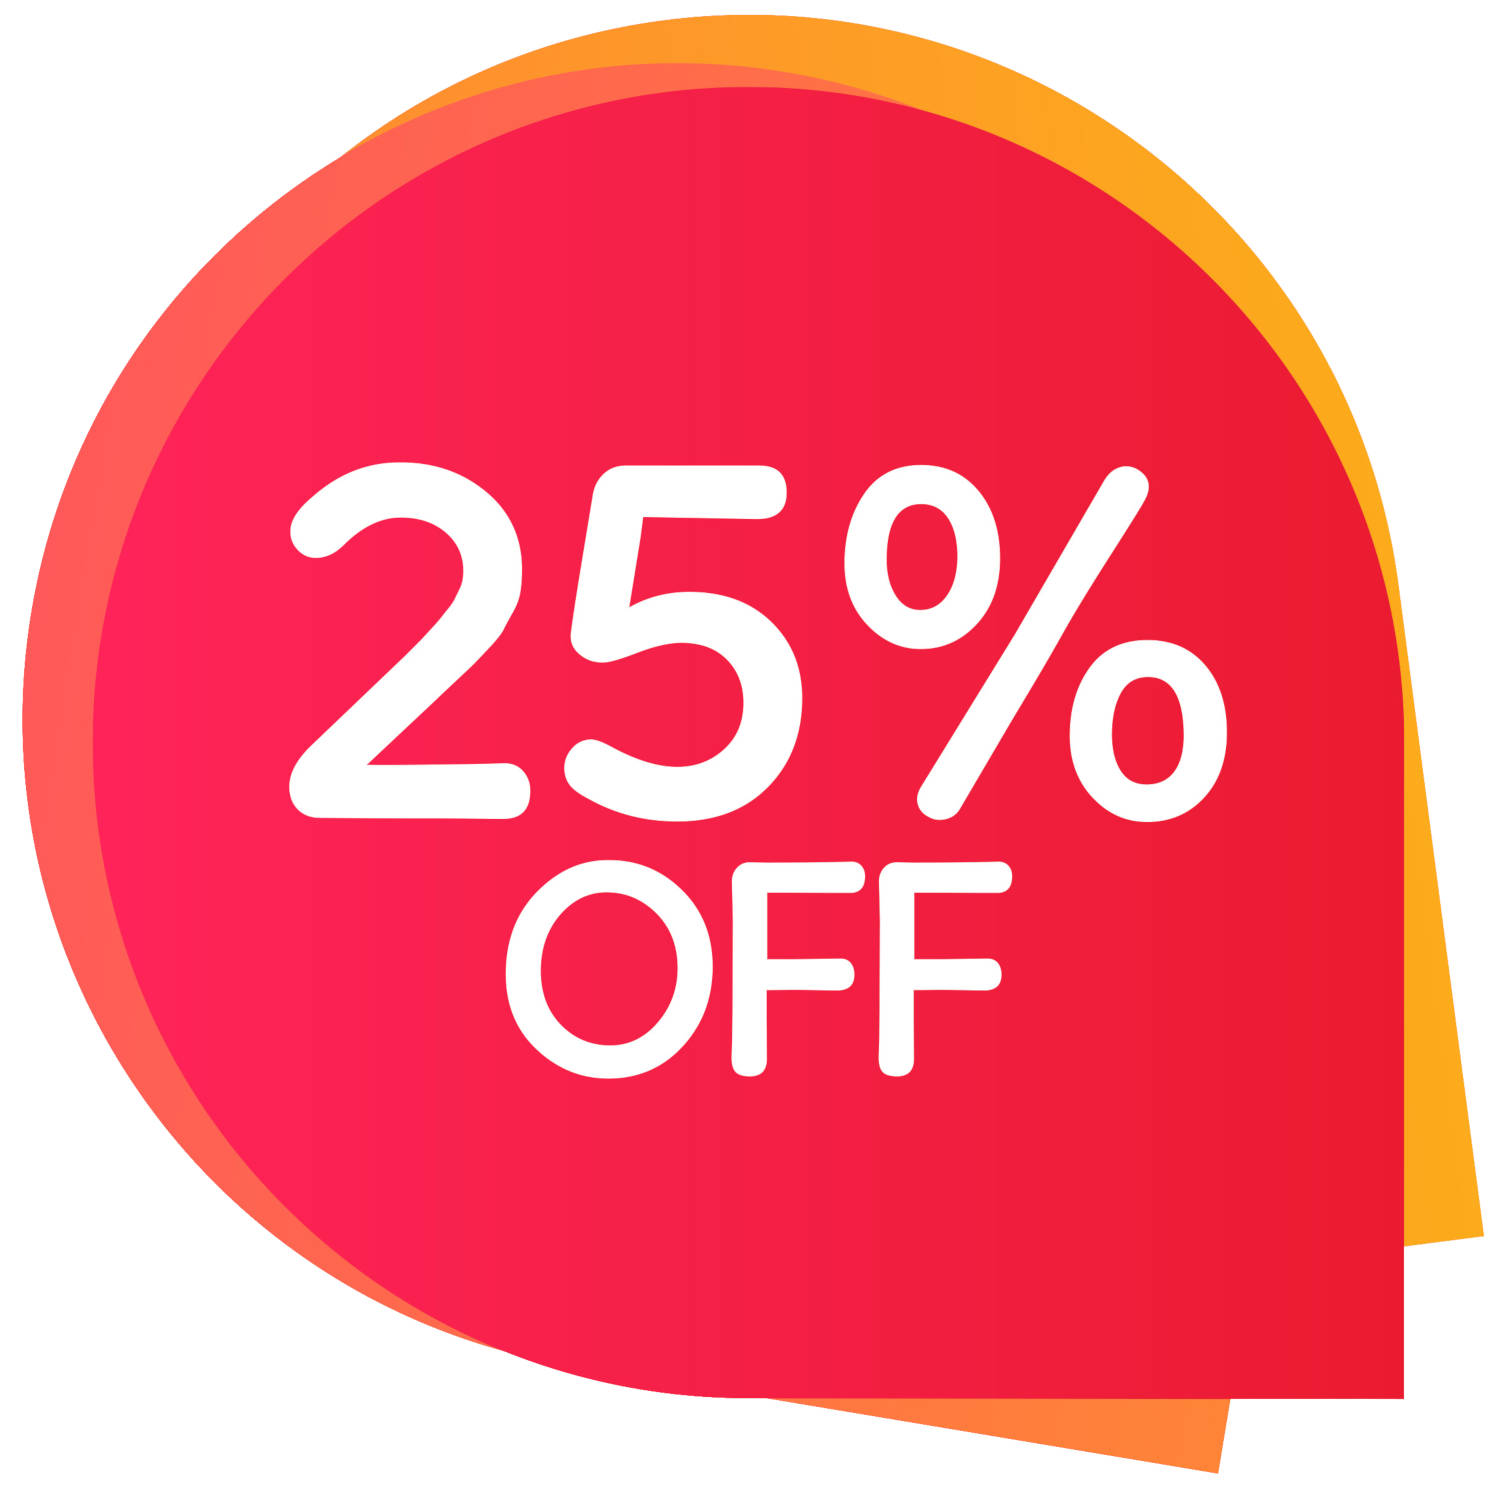 Get 25% OFF ON ALL SEO PACKAGE